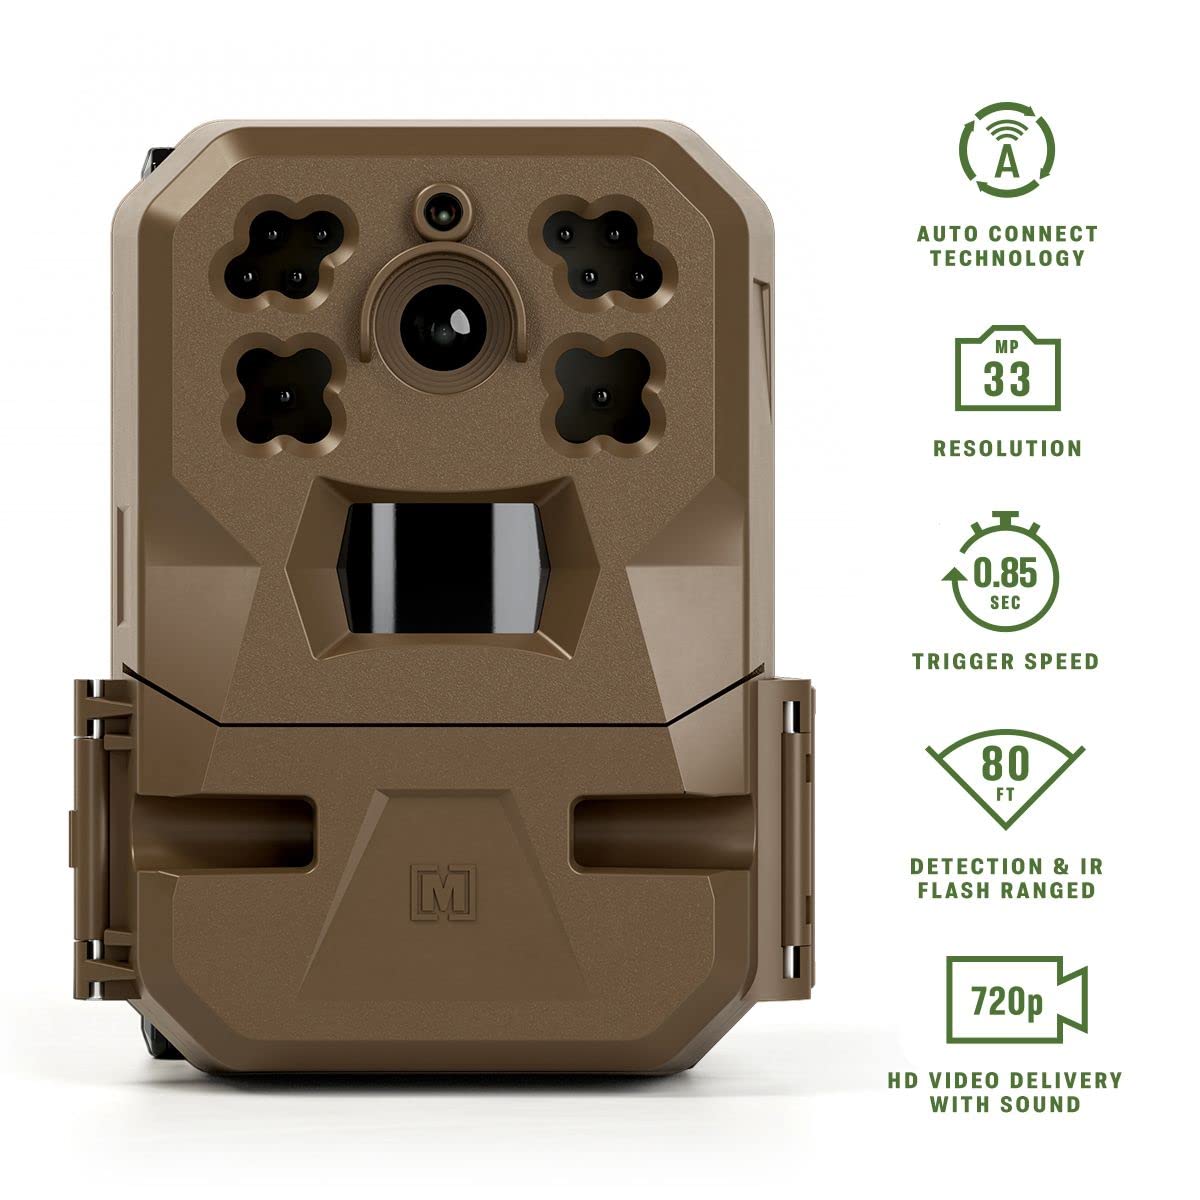 Moultrie Mobile Edge Cellular Trail Camera 2-Pack, Brown